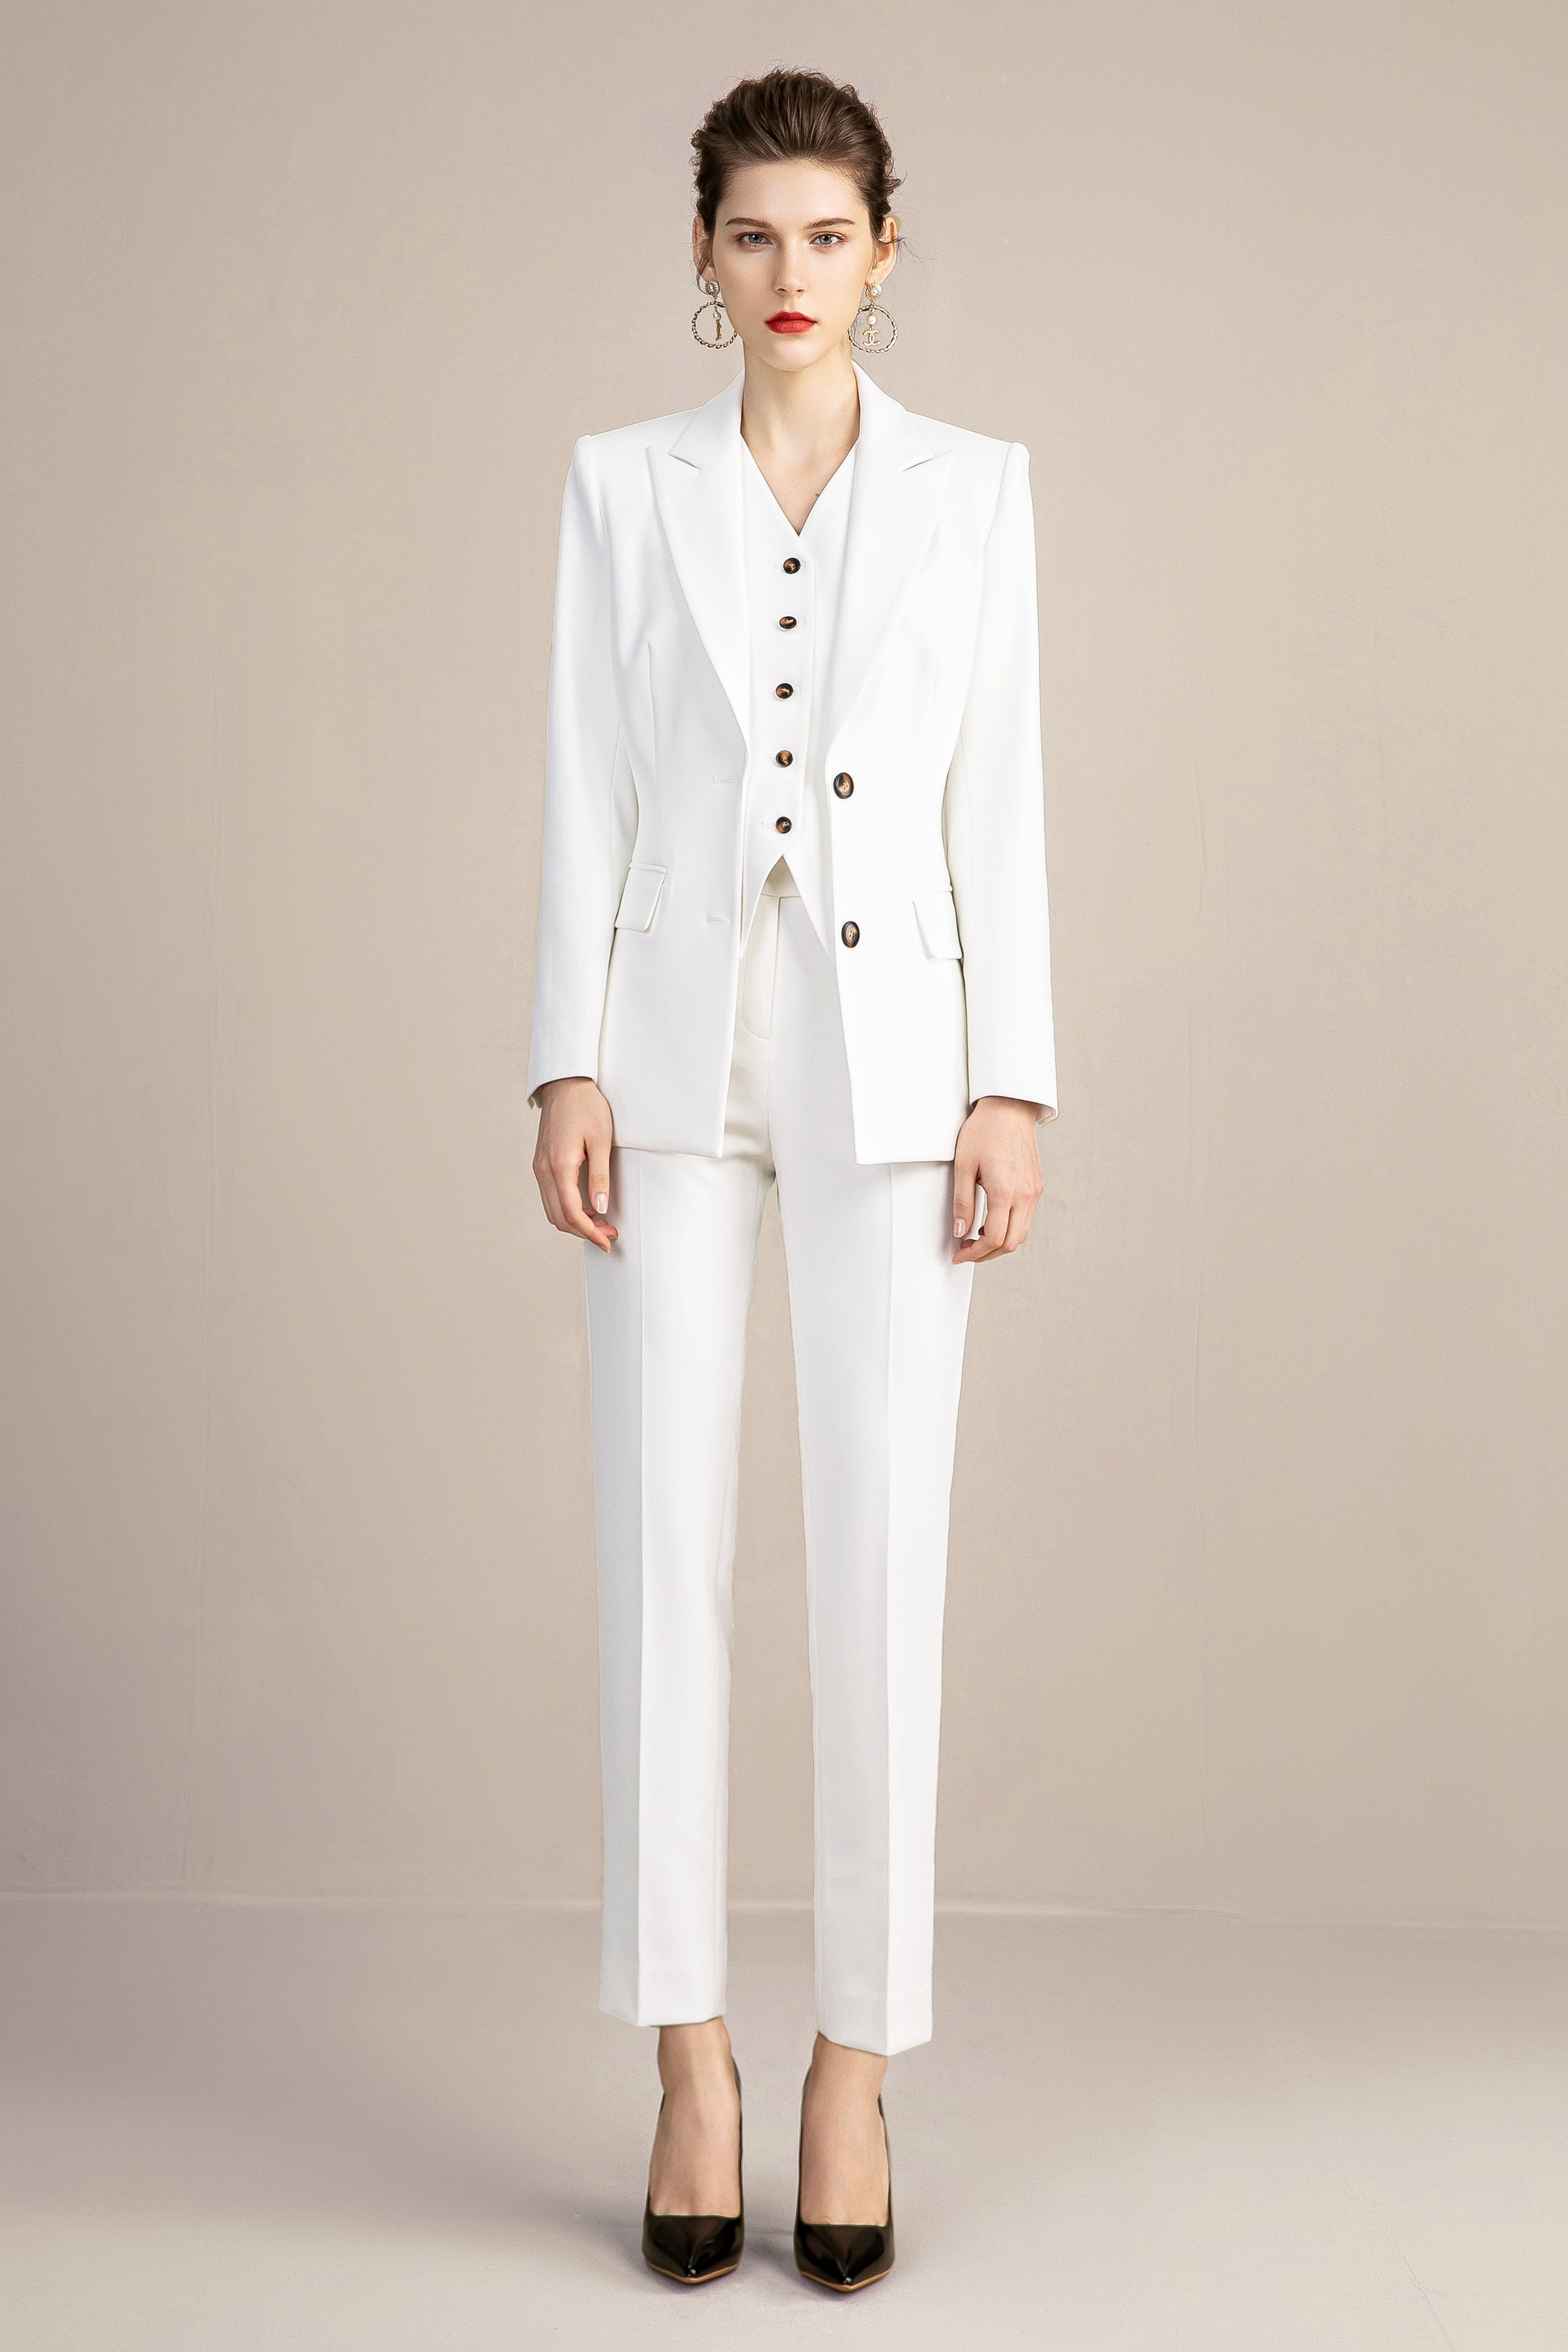 White Pant Suit Womens - For Sale on 1stDibs  white pantsuit, women's  elegant white pant suit, white pant suits